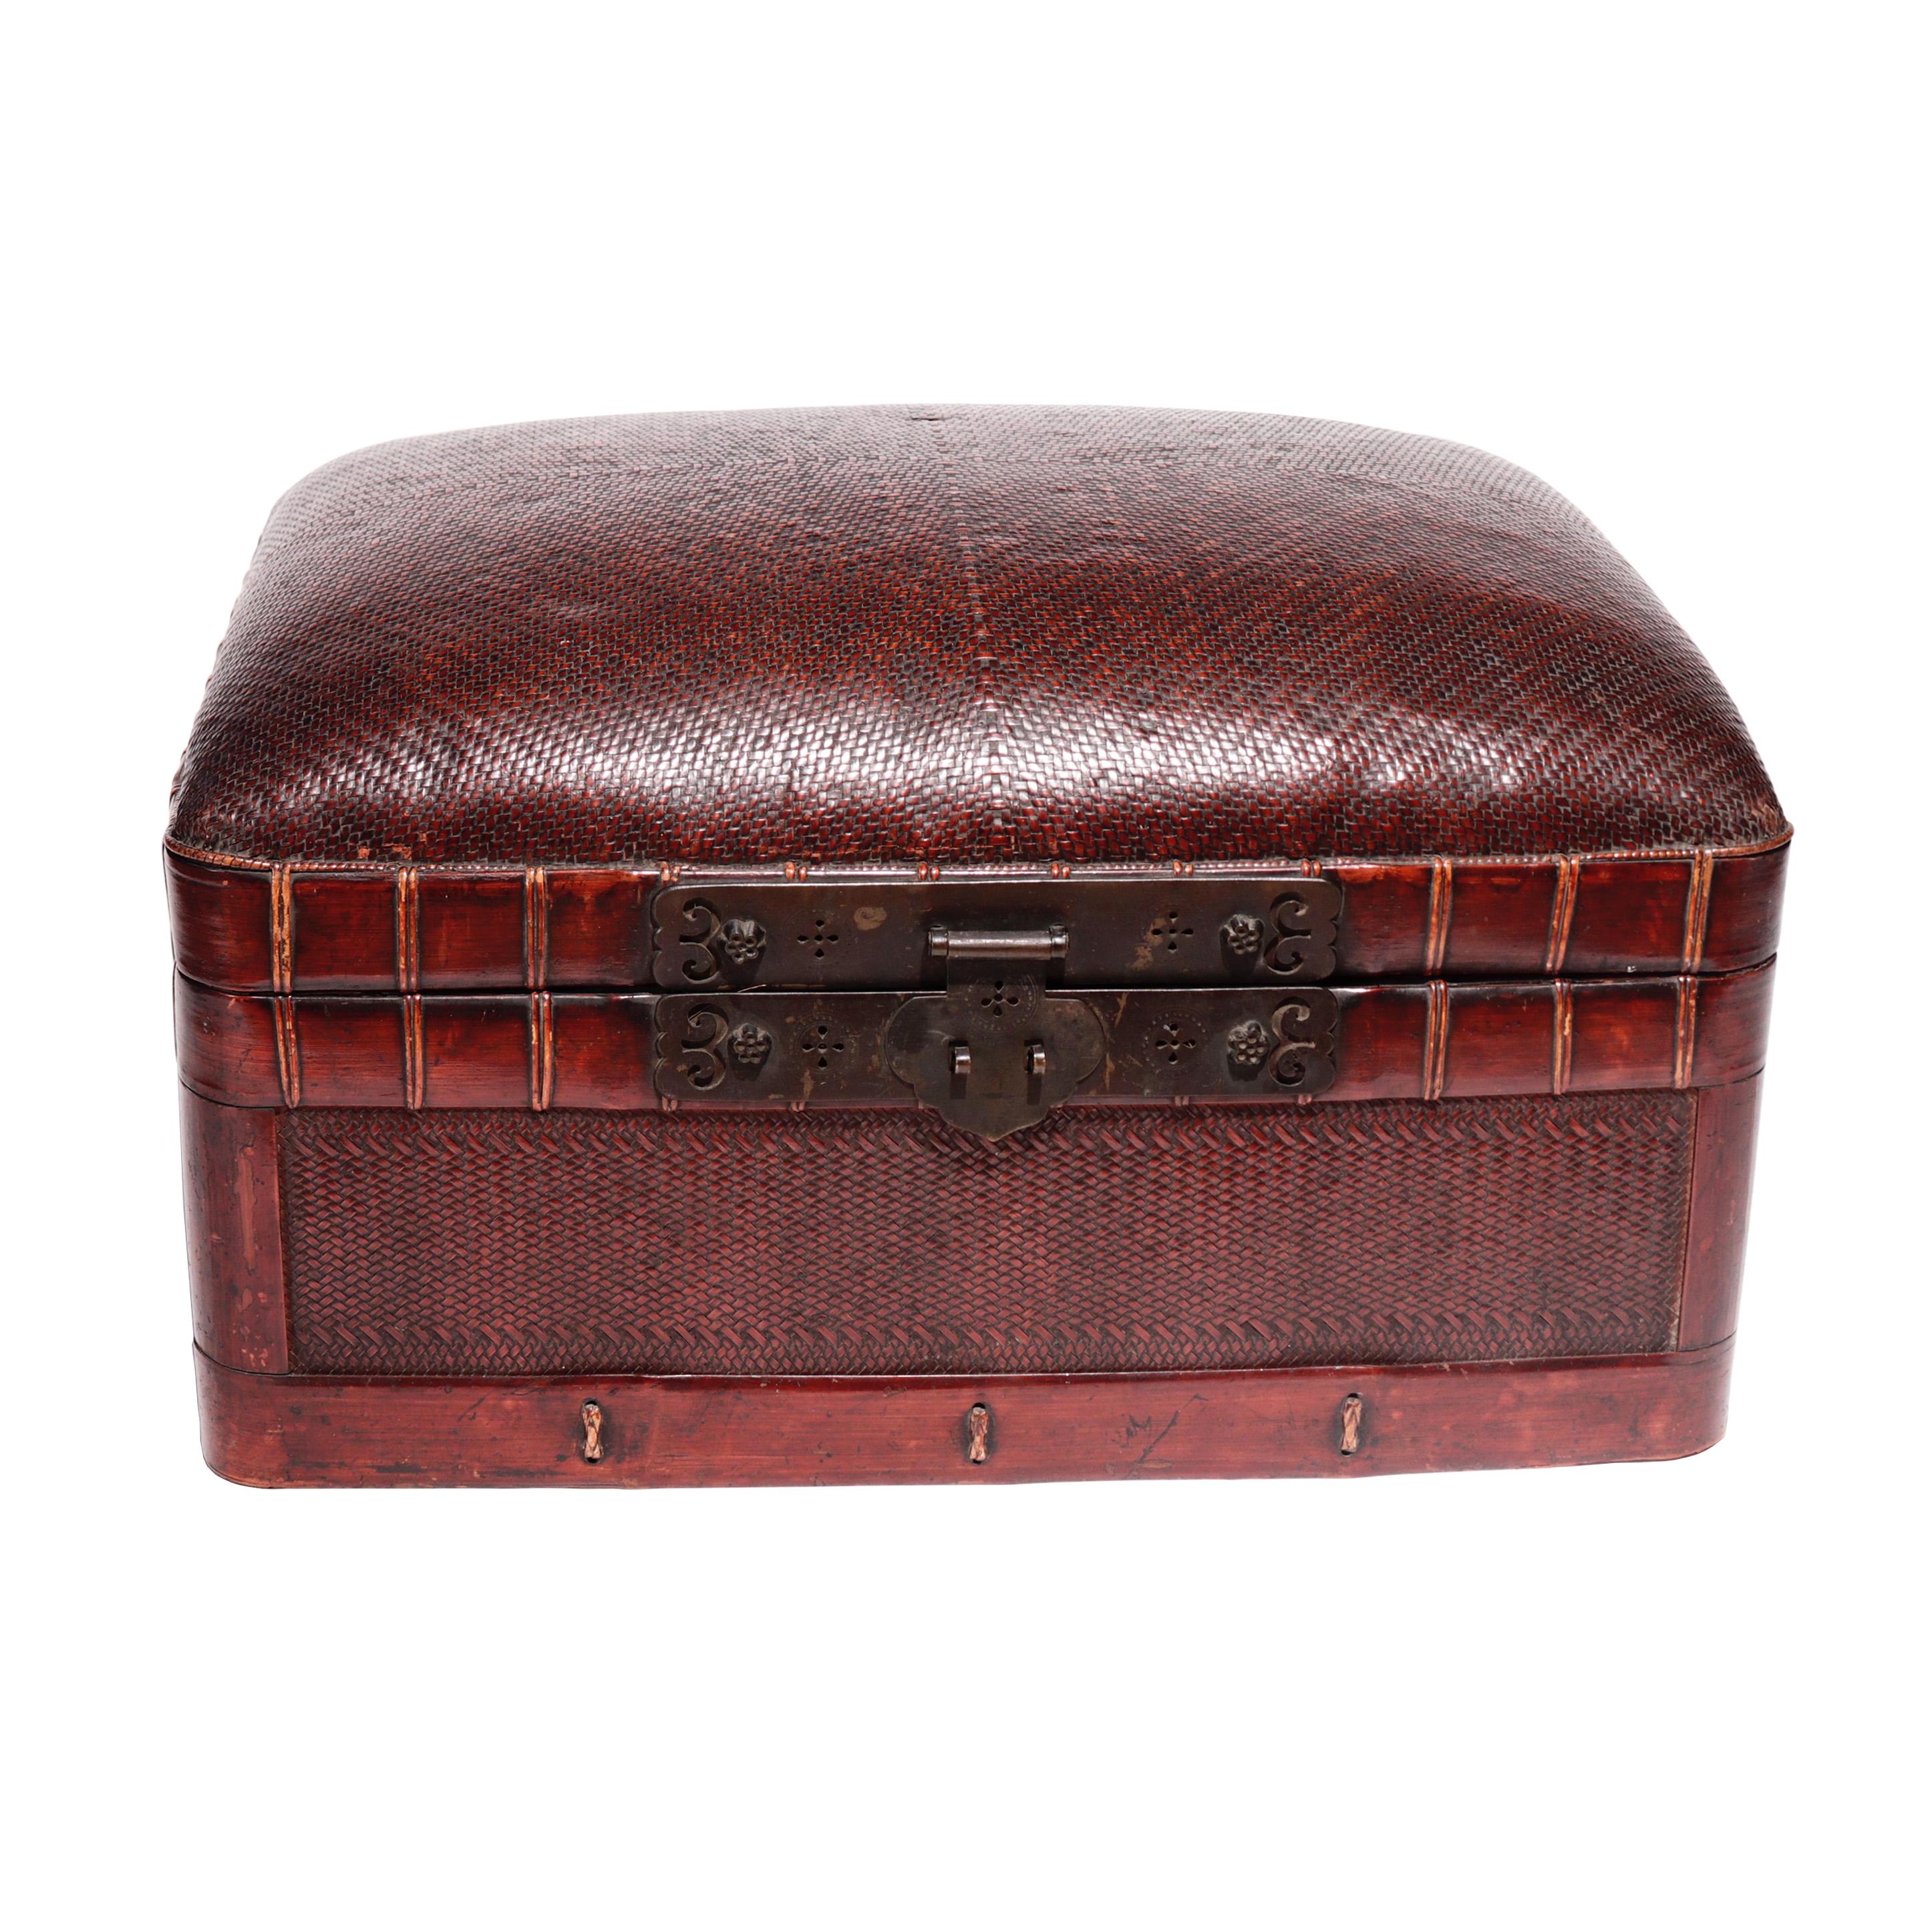 Large Japanese hinged hitsu (kimono storage coffer) woven of bamboo in the Chinese style with broad expanses of two layers of woven mats as the siding and the convex lid trimmed in thicker bamboo and fine knotting with a wood base complete with